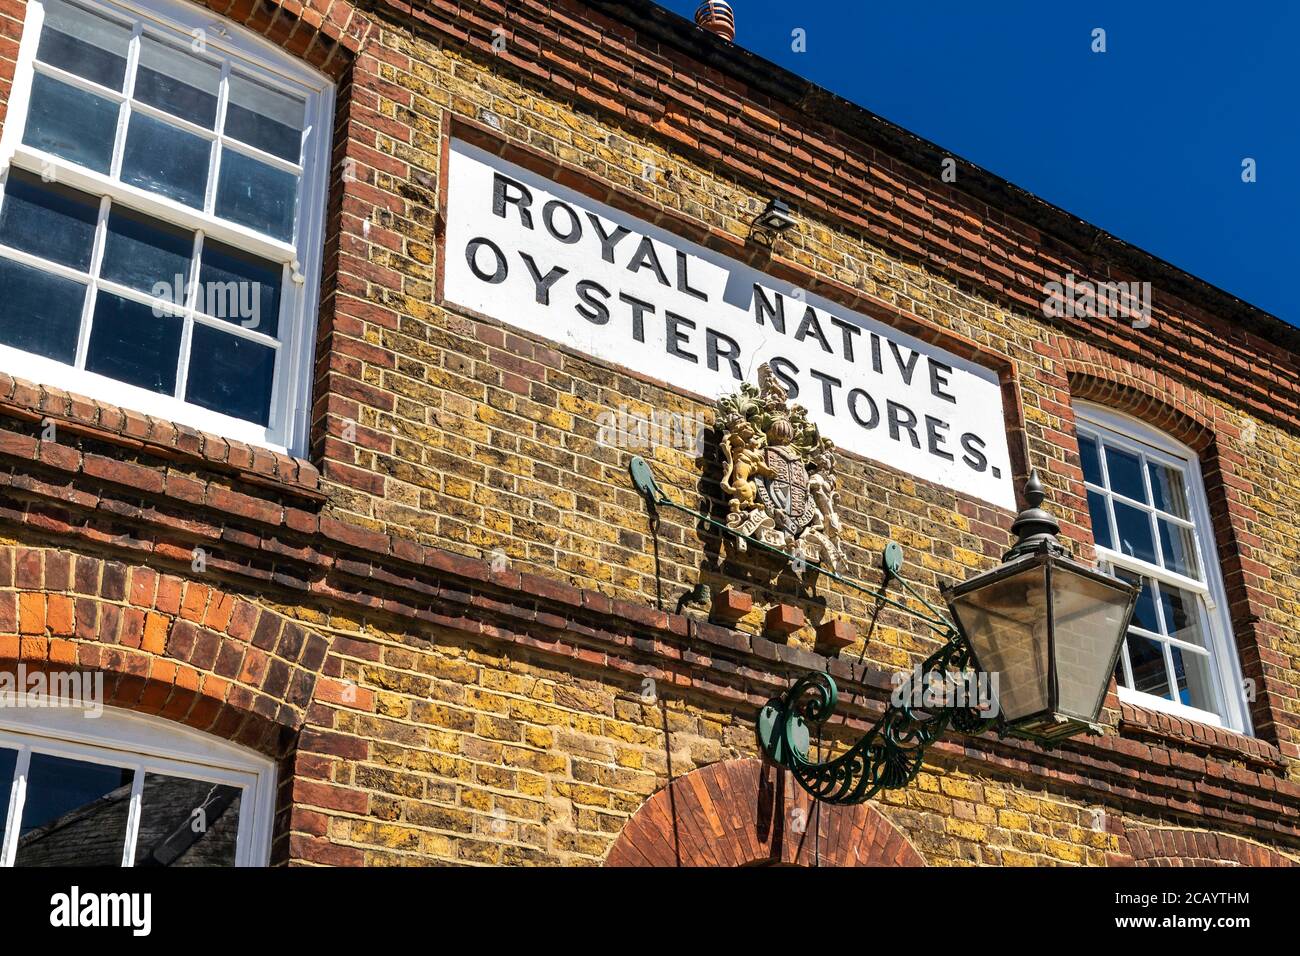 Royal Native Oyster Stores building in Whitstable, Kent, UK Stock Photo